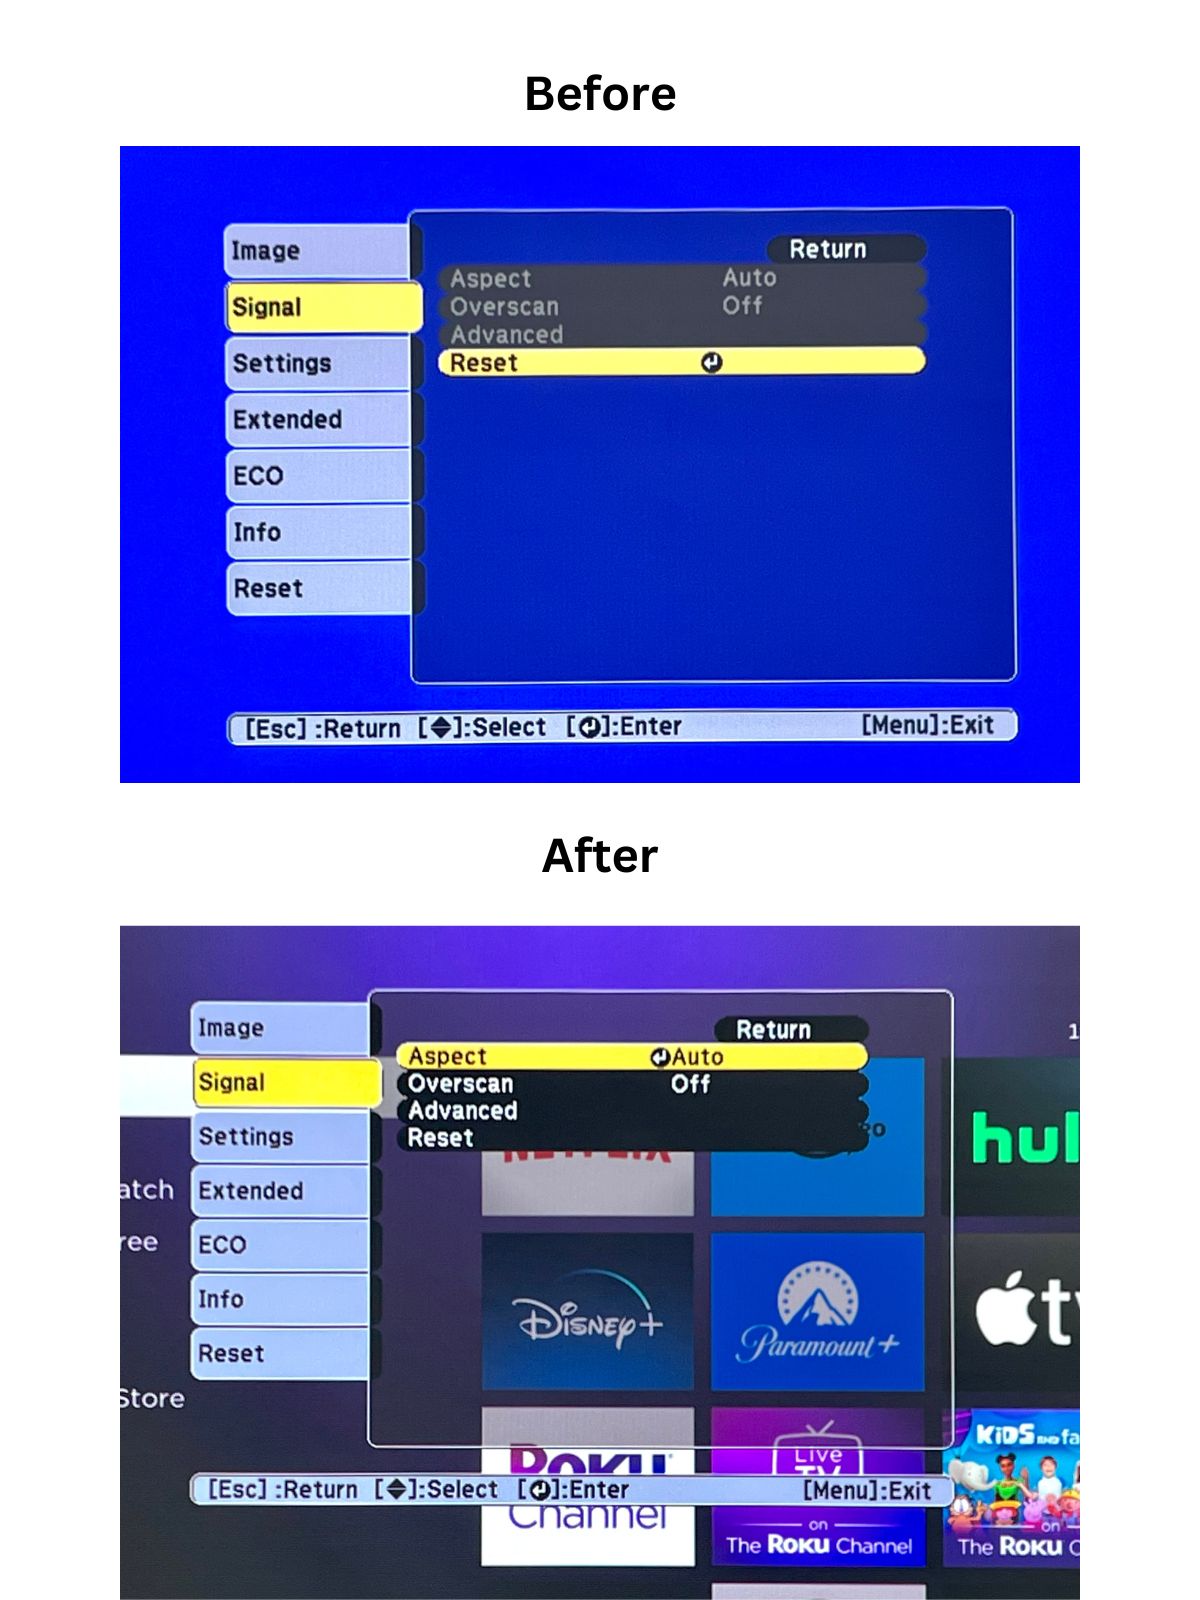 aspect ratio option before and after plugging a roku player into an epson projector